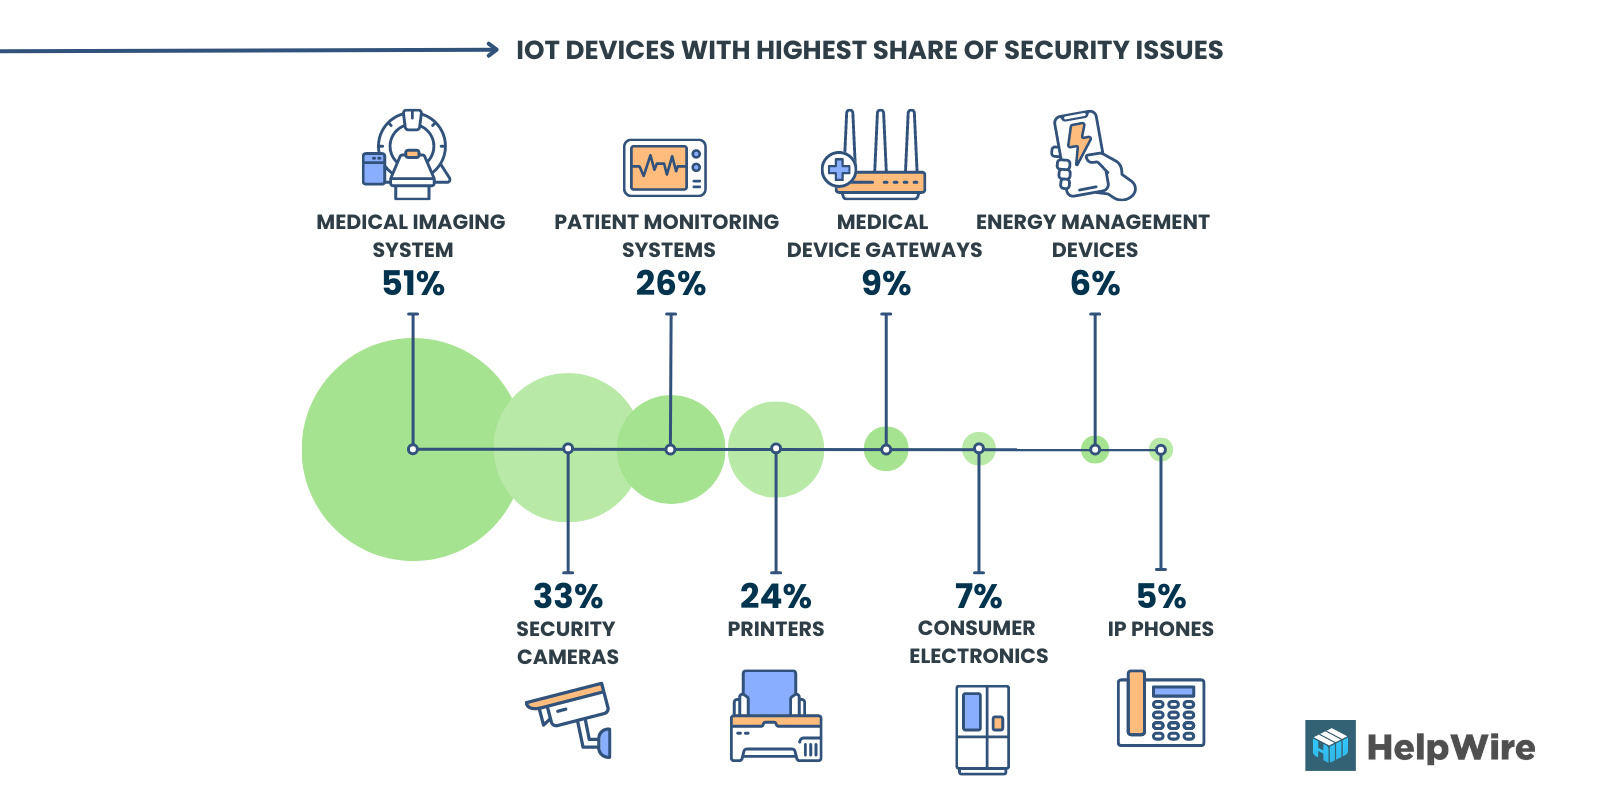 IoT devices with the highest share of security issues